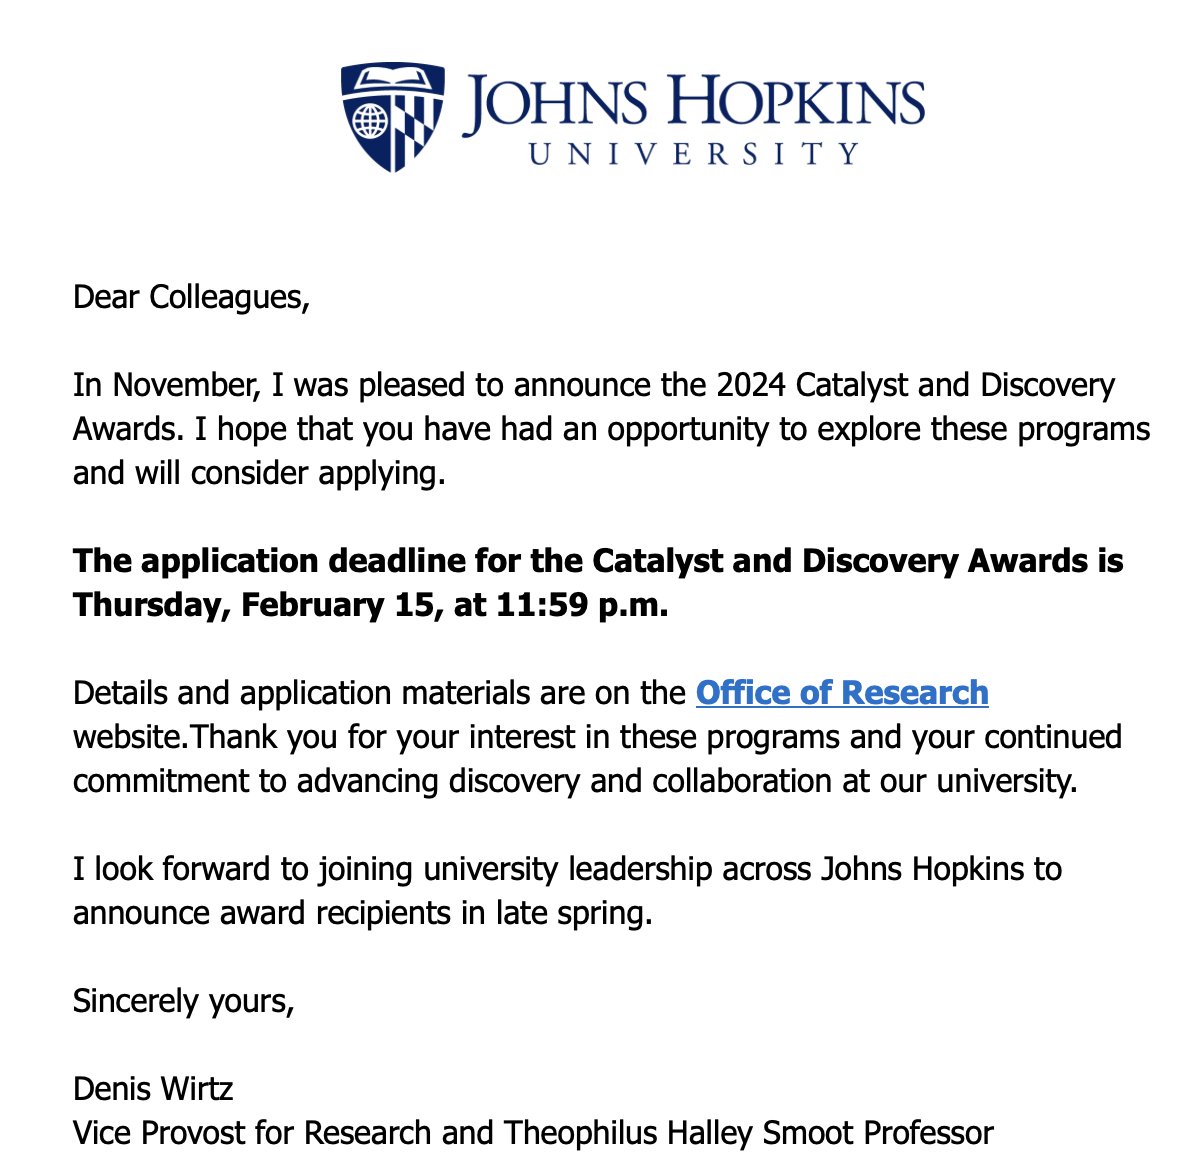 My office oversees an annual investment of >$5M that supports collaborative research and early-career faculty at the Johns Hopkins University. Hopkins researchers, please apply to: (1) Discovery award: research.jhu.edu/major-initiati… (2) Catalyst award: research.jhu.edu/major-initiati… Feb 15